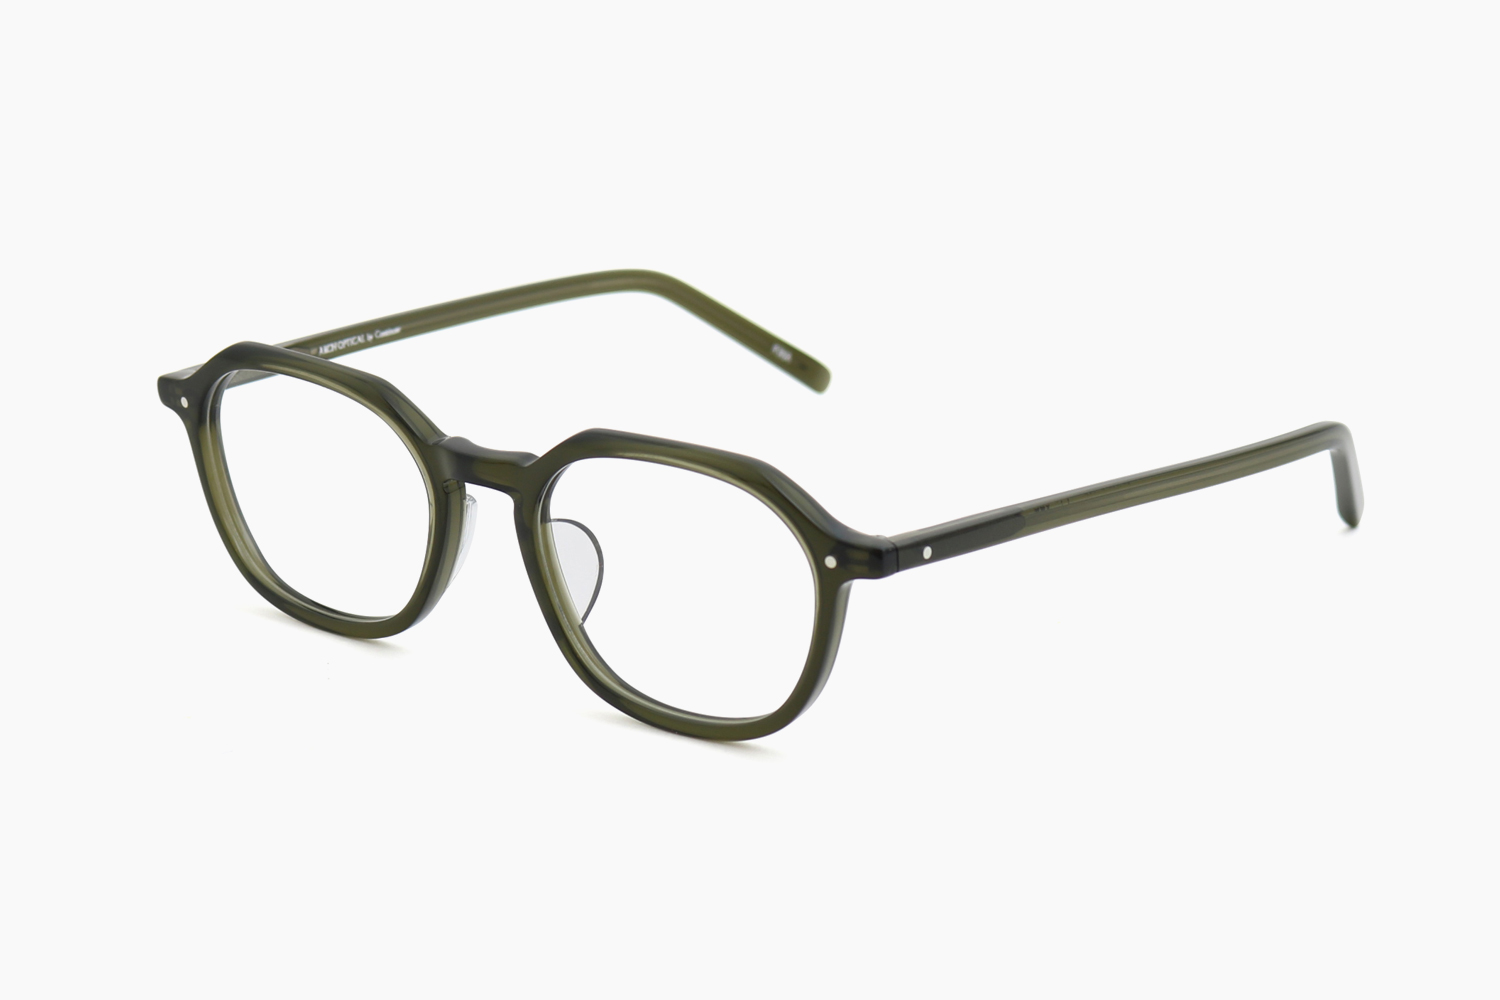 ARCH OPTICAL｜＊ESSENTIALS by Continuer〈Original Contents 〉｜A/a